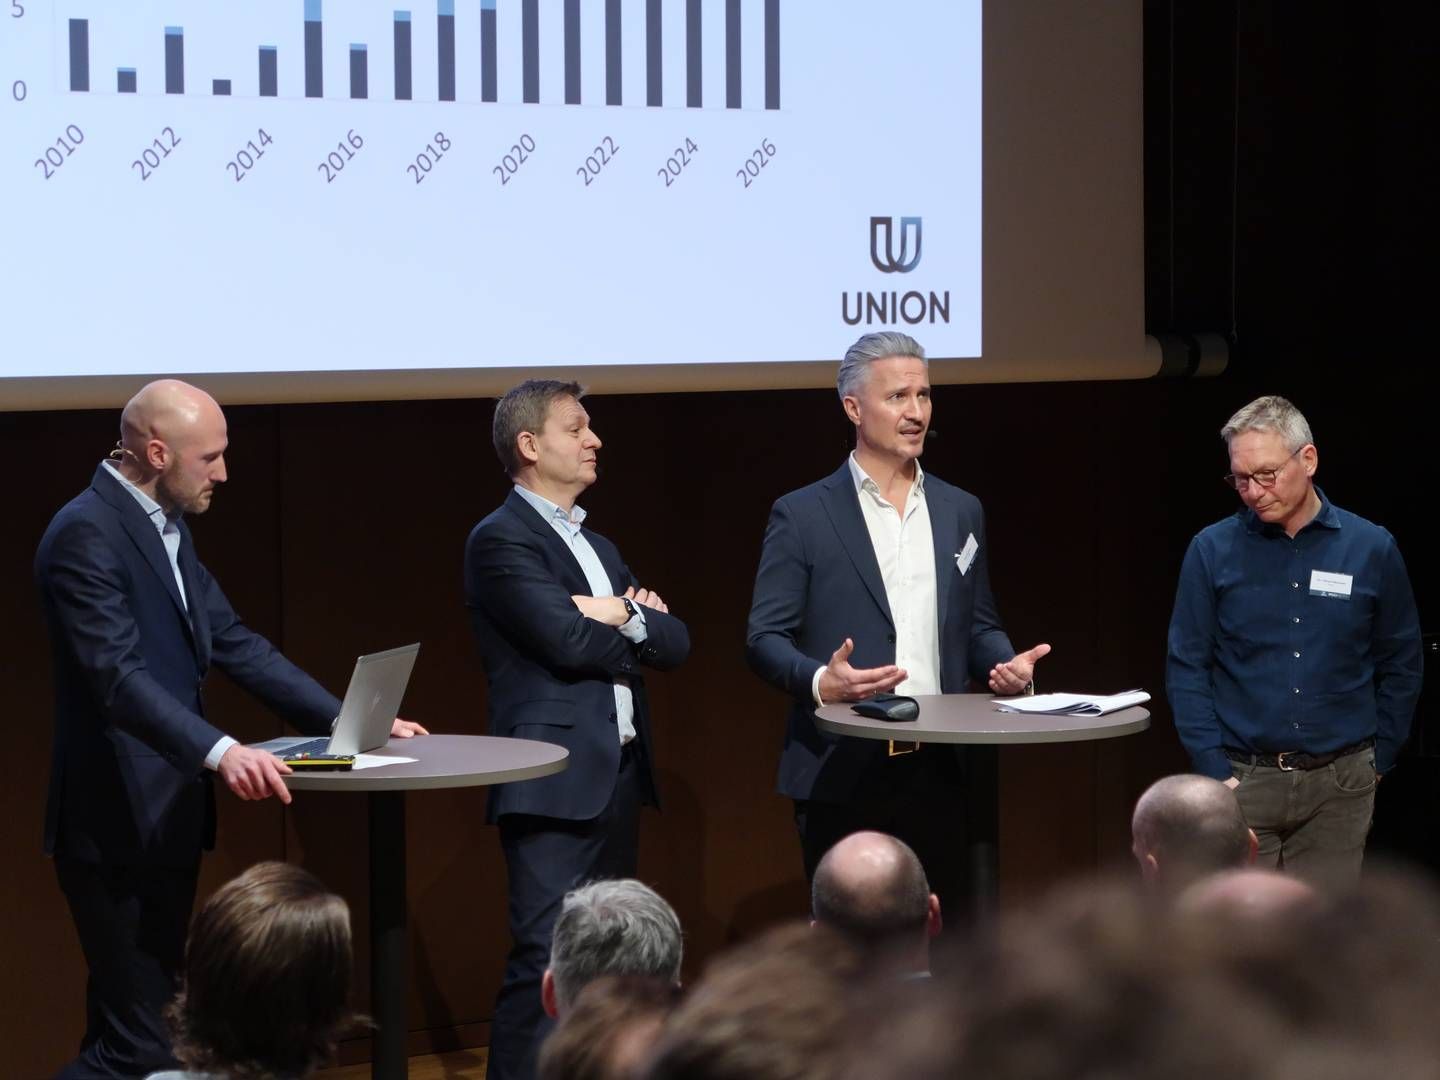 From left: Robert Nystad, head of research at UNION, Pål Ringholm, CIO of PKH, Tom Hestnes, CEO of Norselab, and Per-Håvard Martinsen of Pareto Securities, at Norwegian UNION's recent investor seminar. | Foto: Øystein Byberg